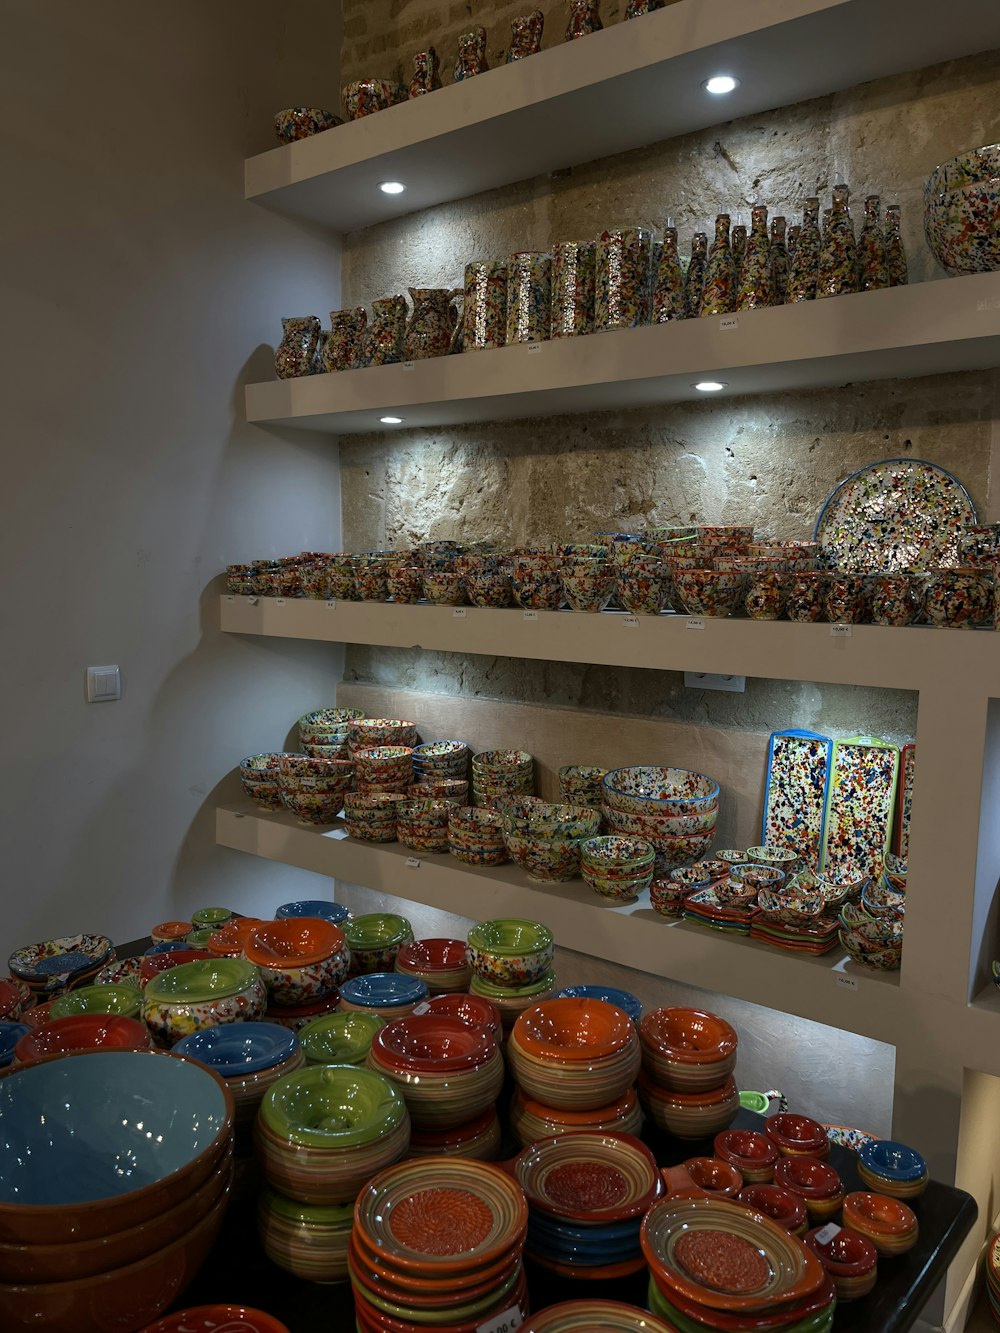 a shelf with many plates and bowls on it